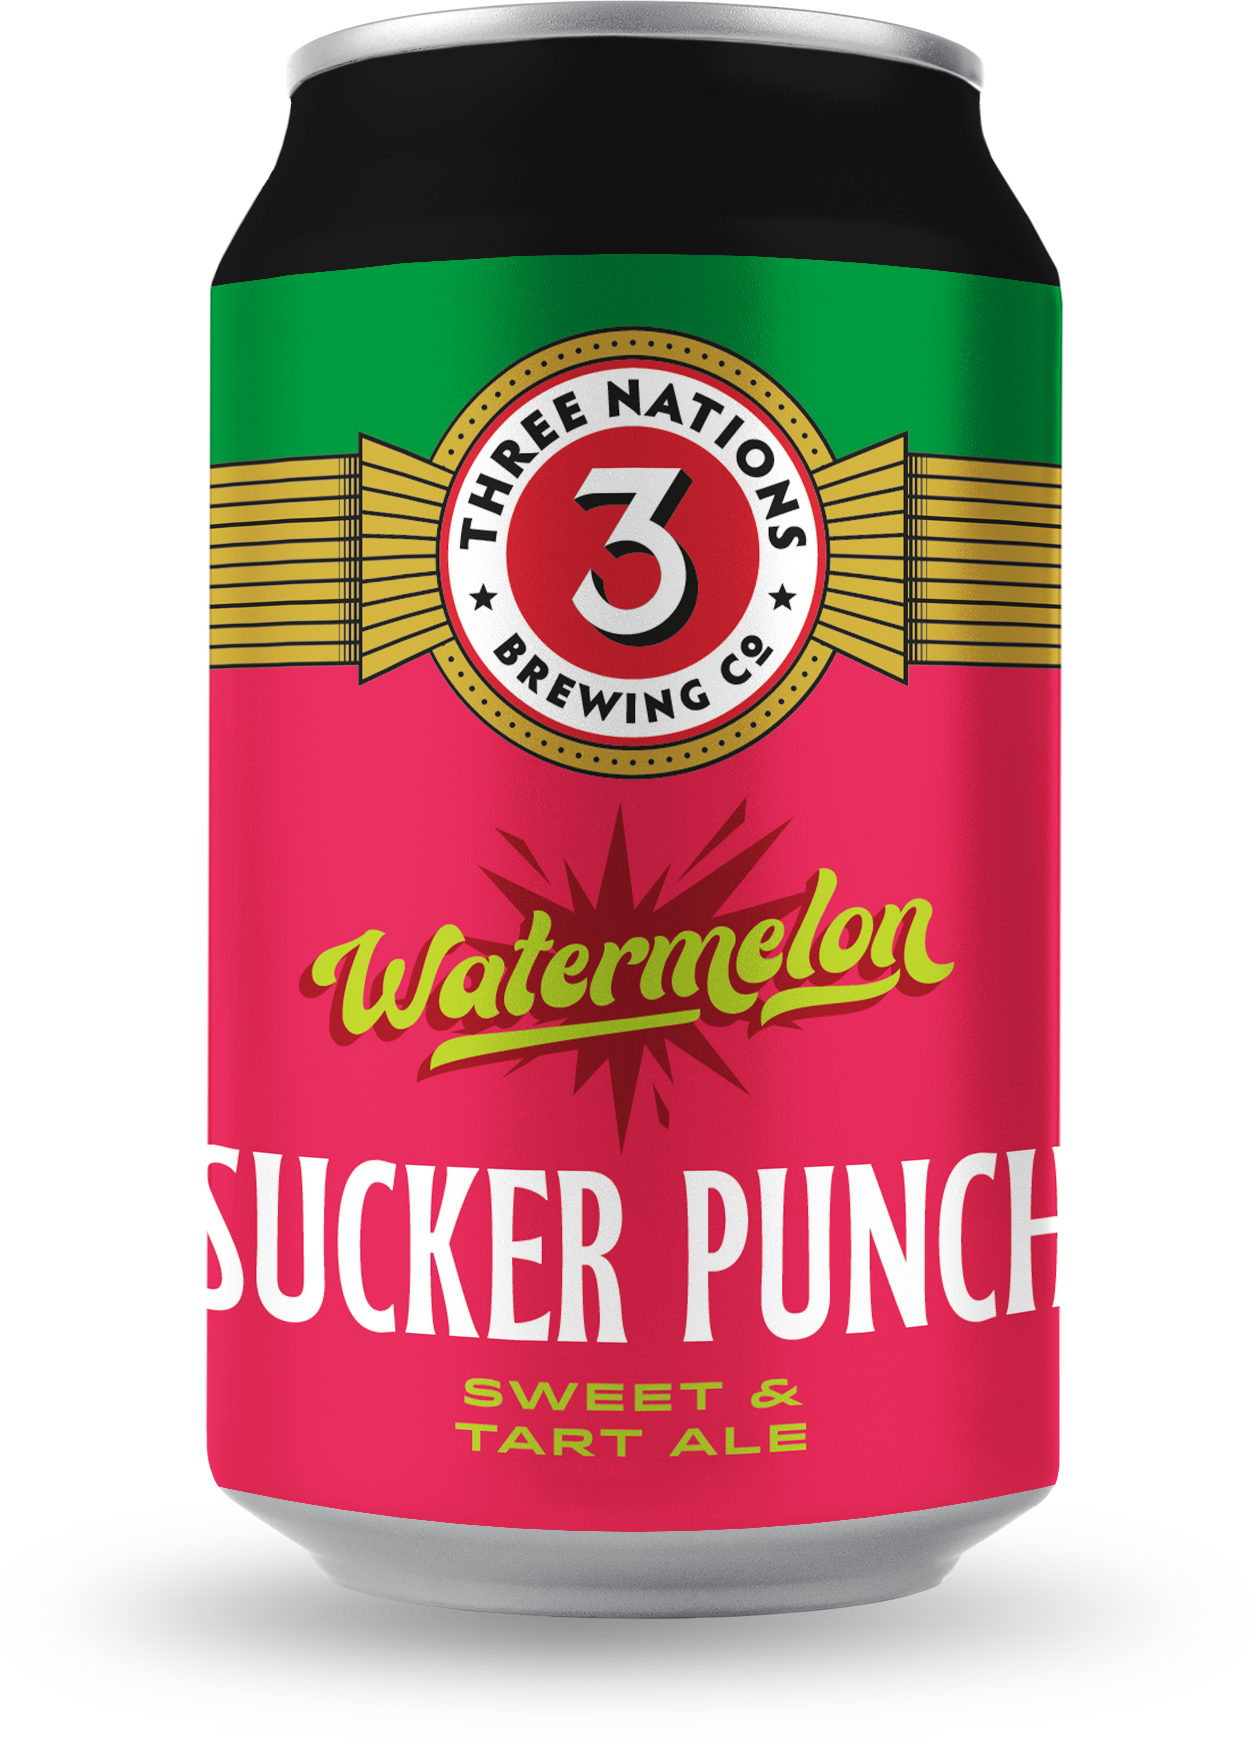 3 Nations Brewing's Watermelon Sucker punch can design